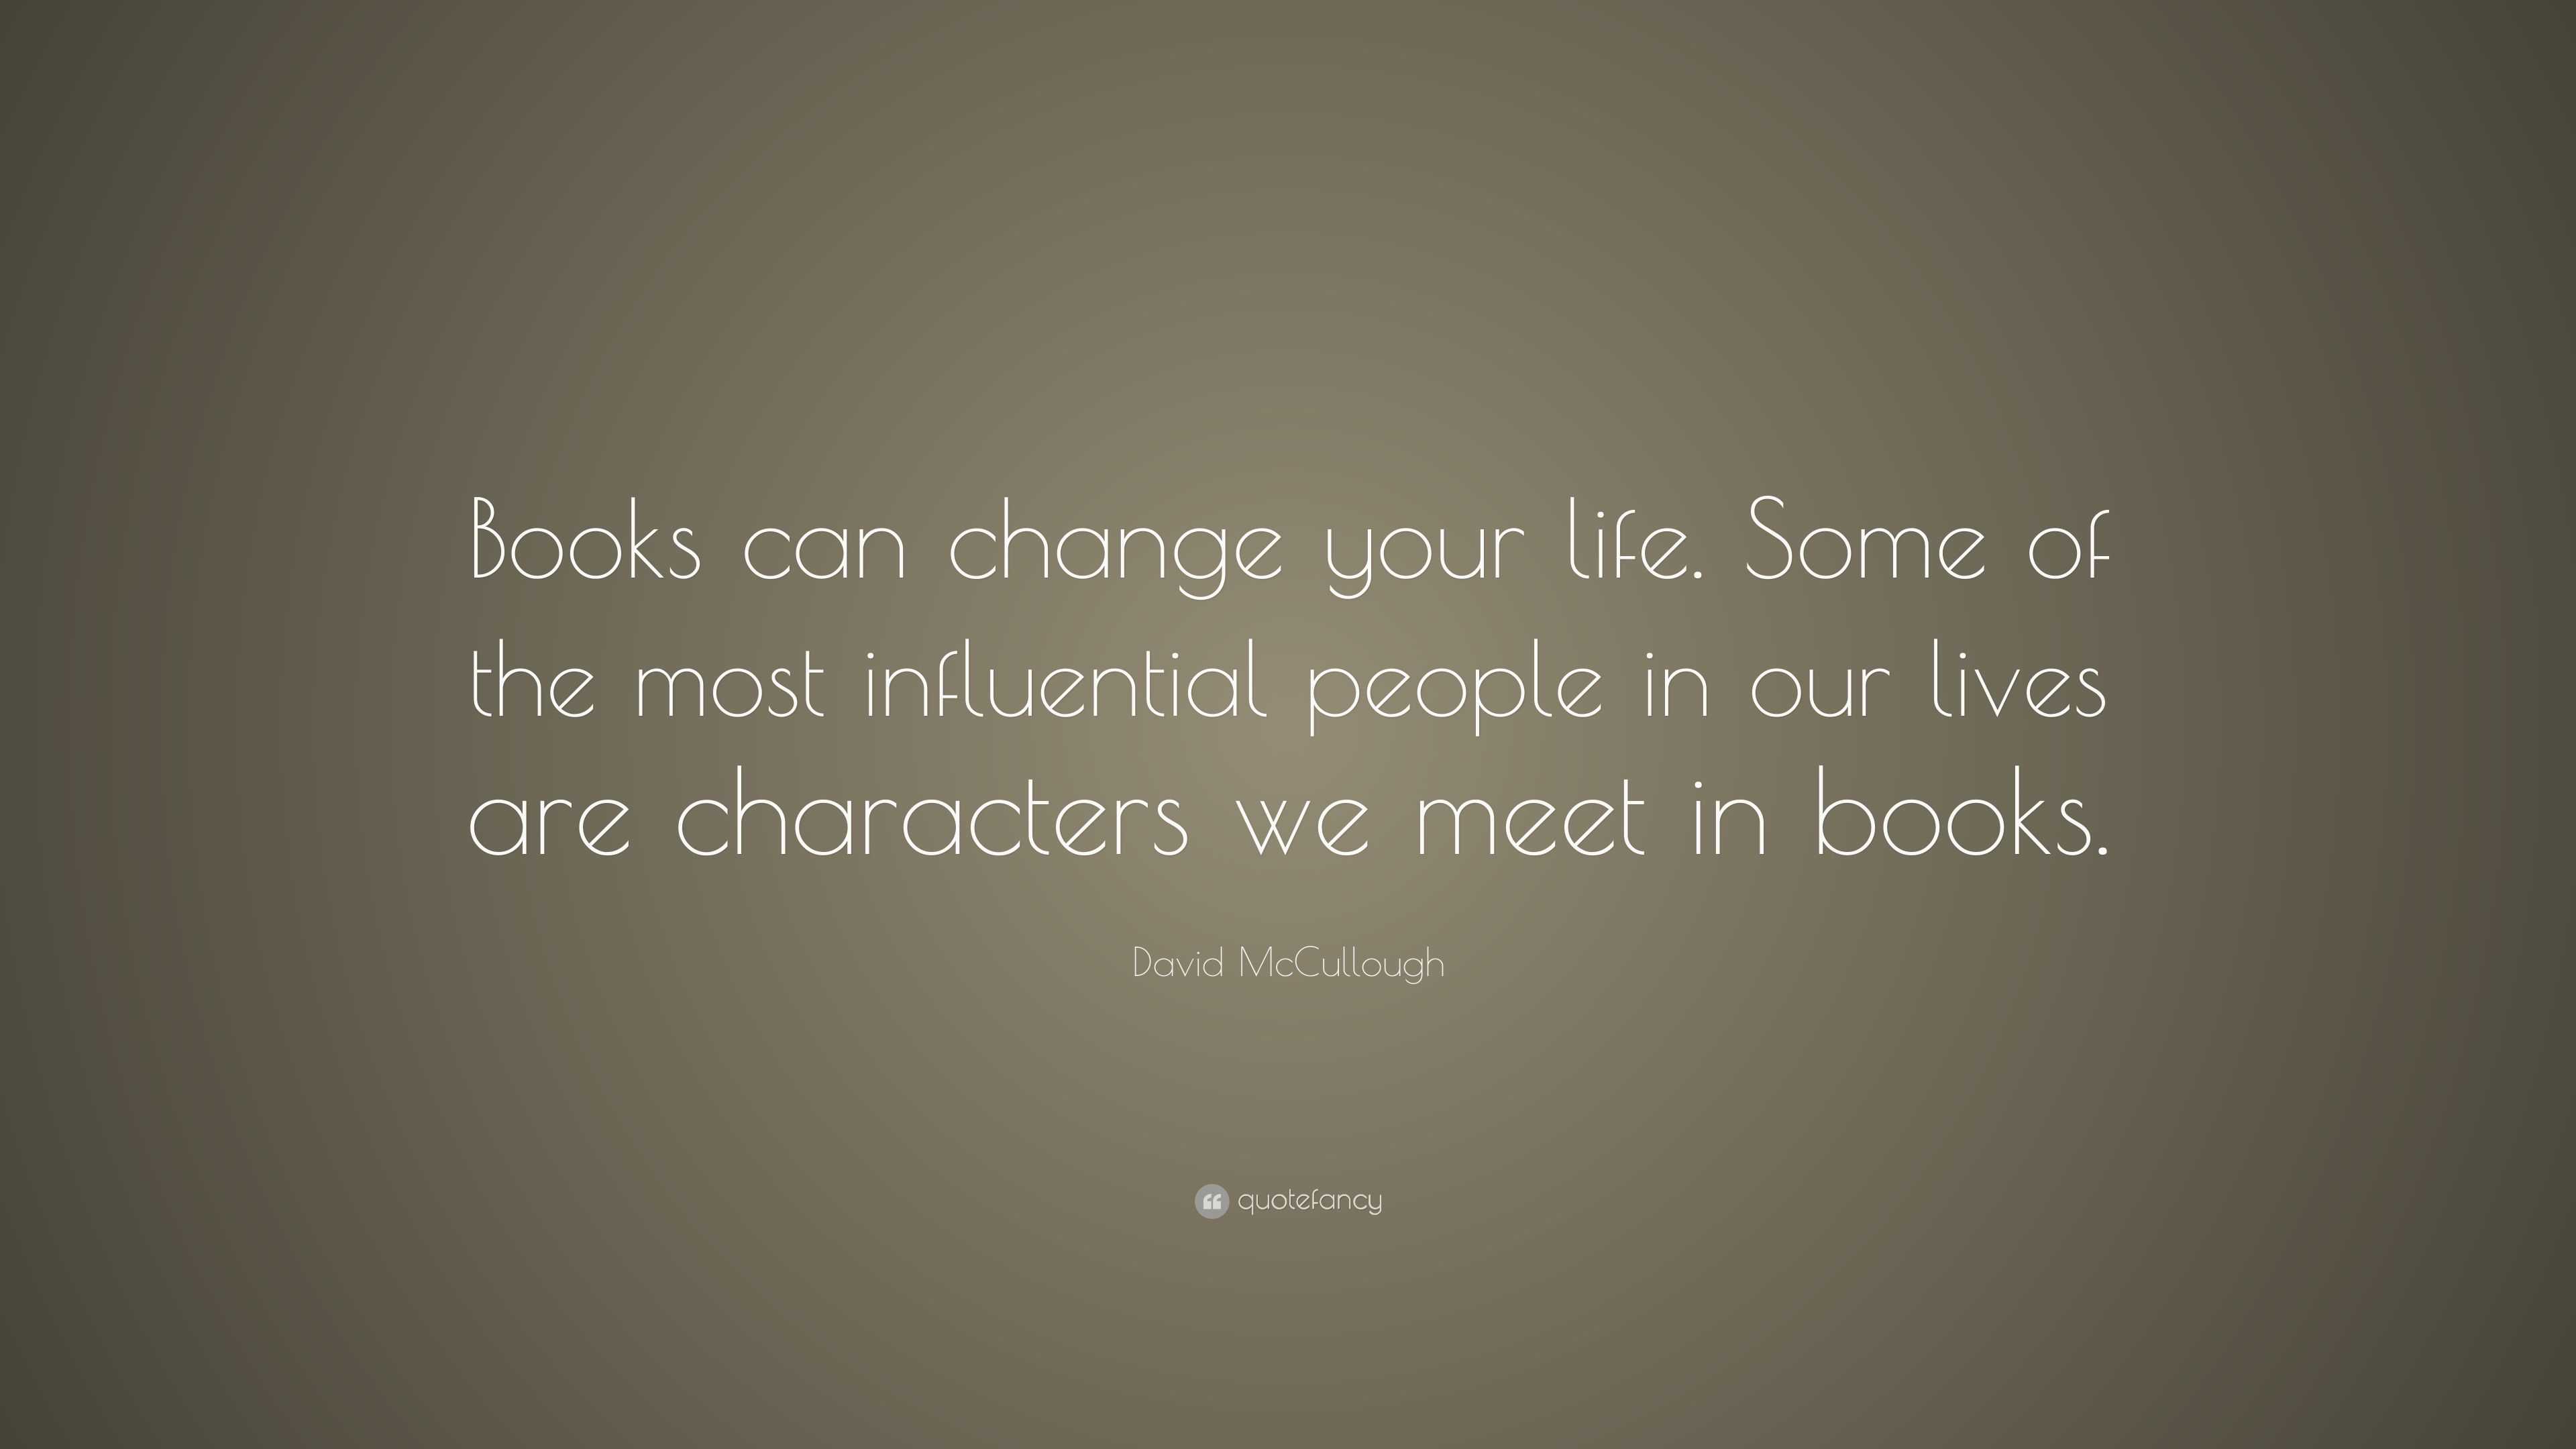 David McCullough Quote: “Books can change your life. Some of the most ...